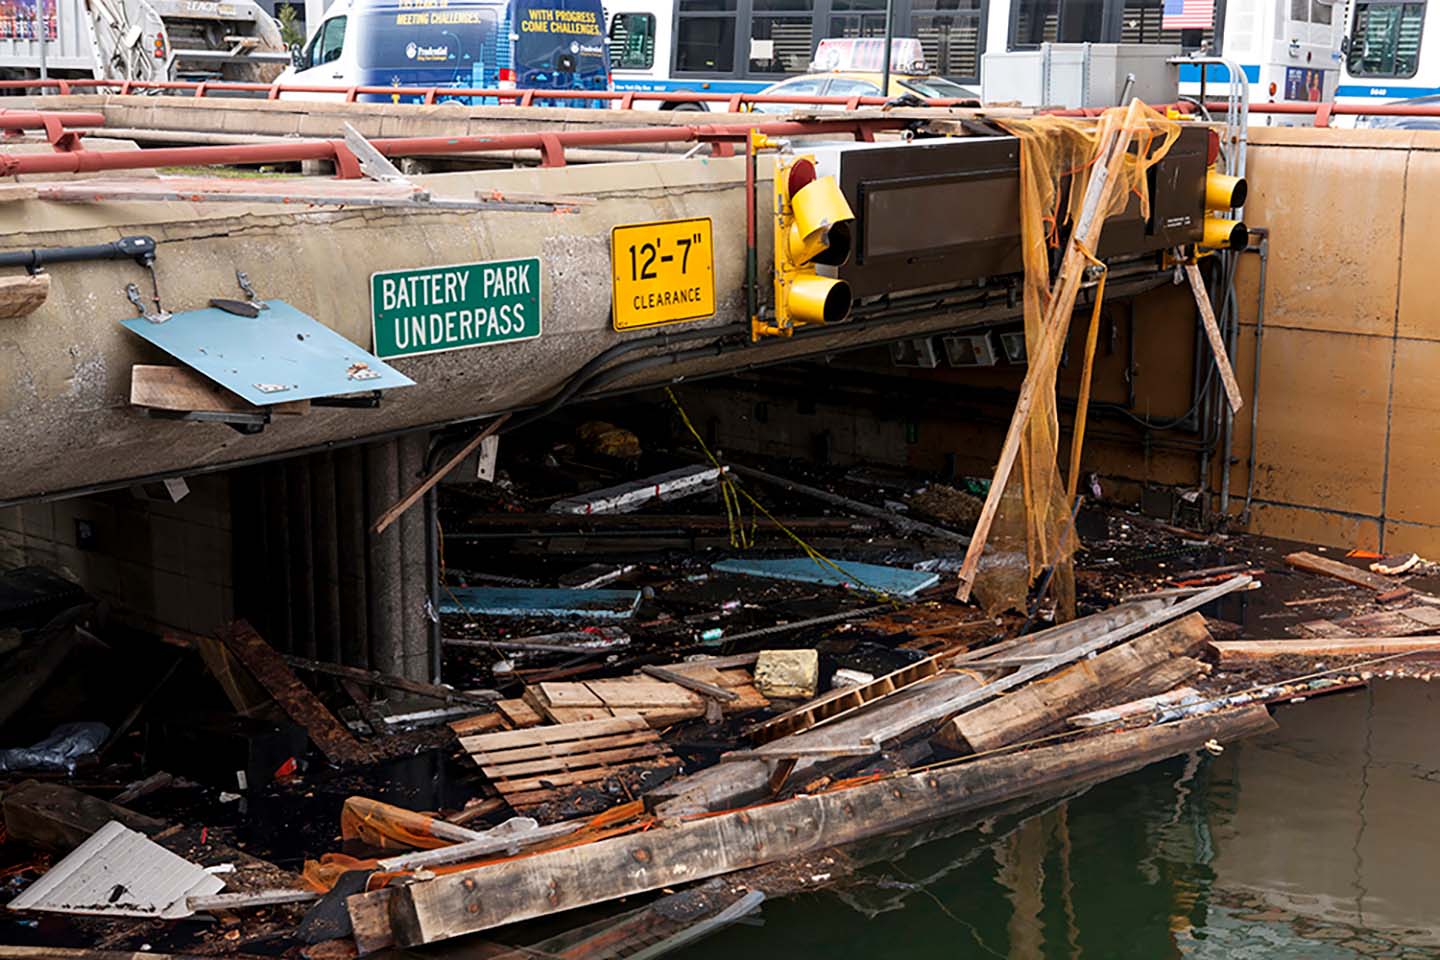 Photo of a flooded underpass with planks of wood and other debris floating on the water. White text on a green street sign reads "Battery Park Underpass"